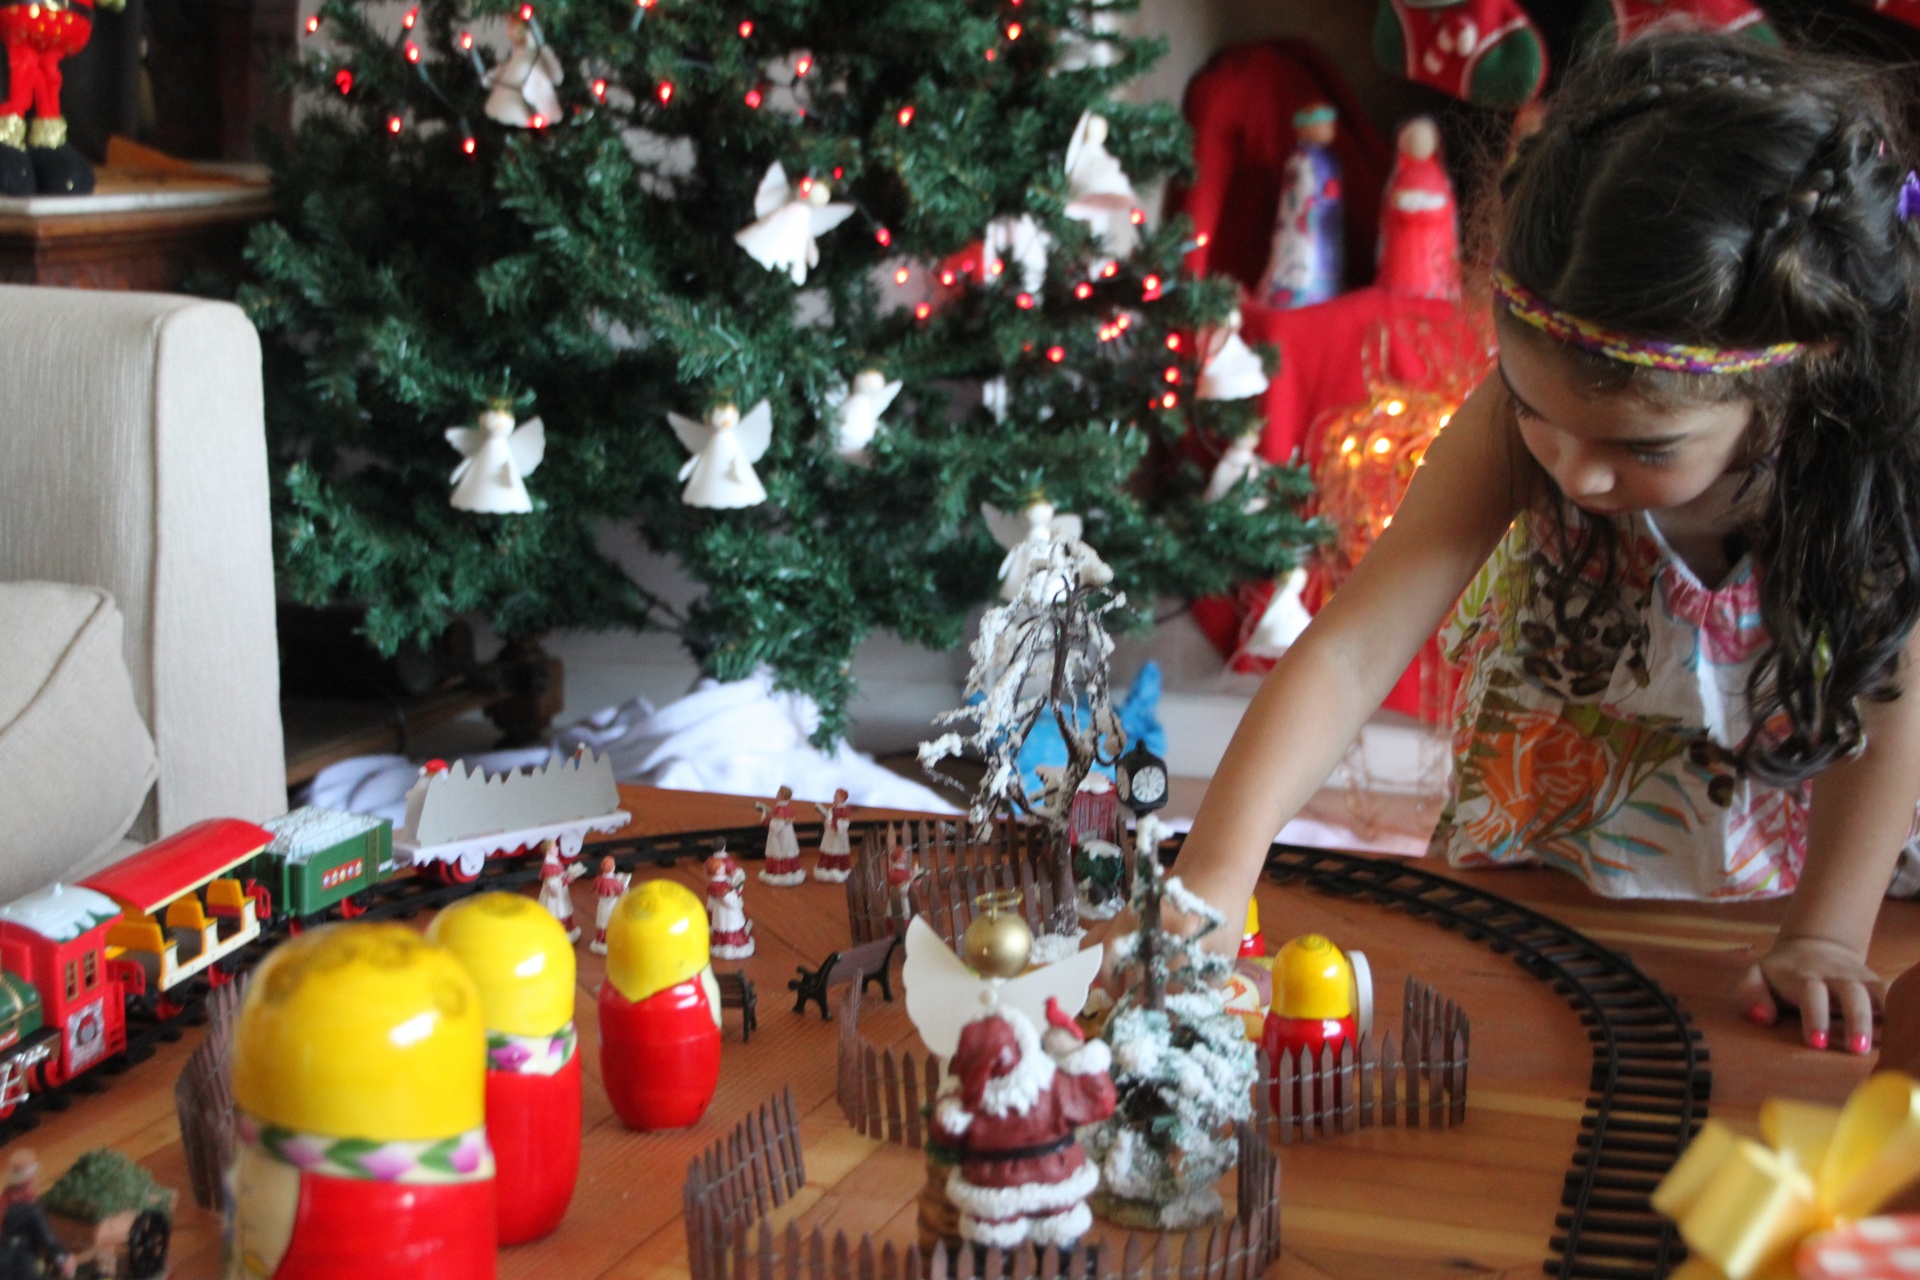 Girl playing with a train at Christmas